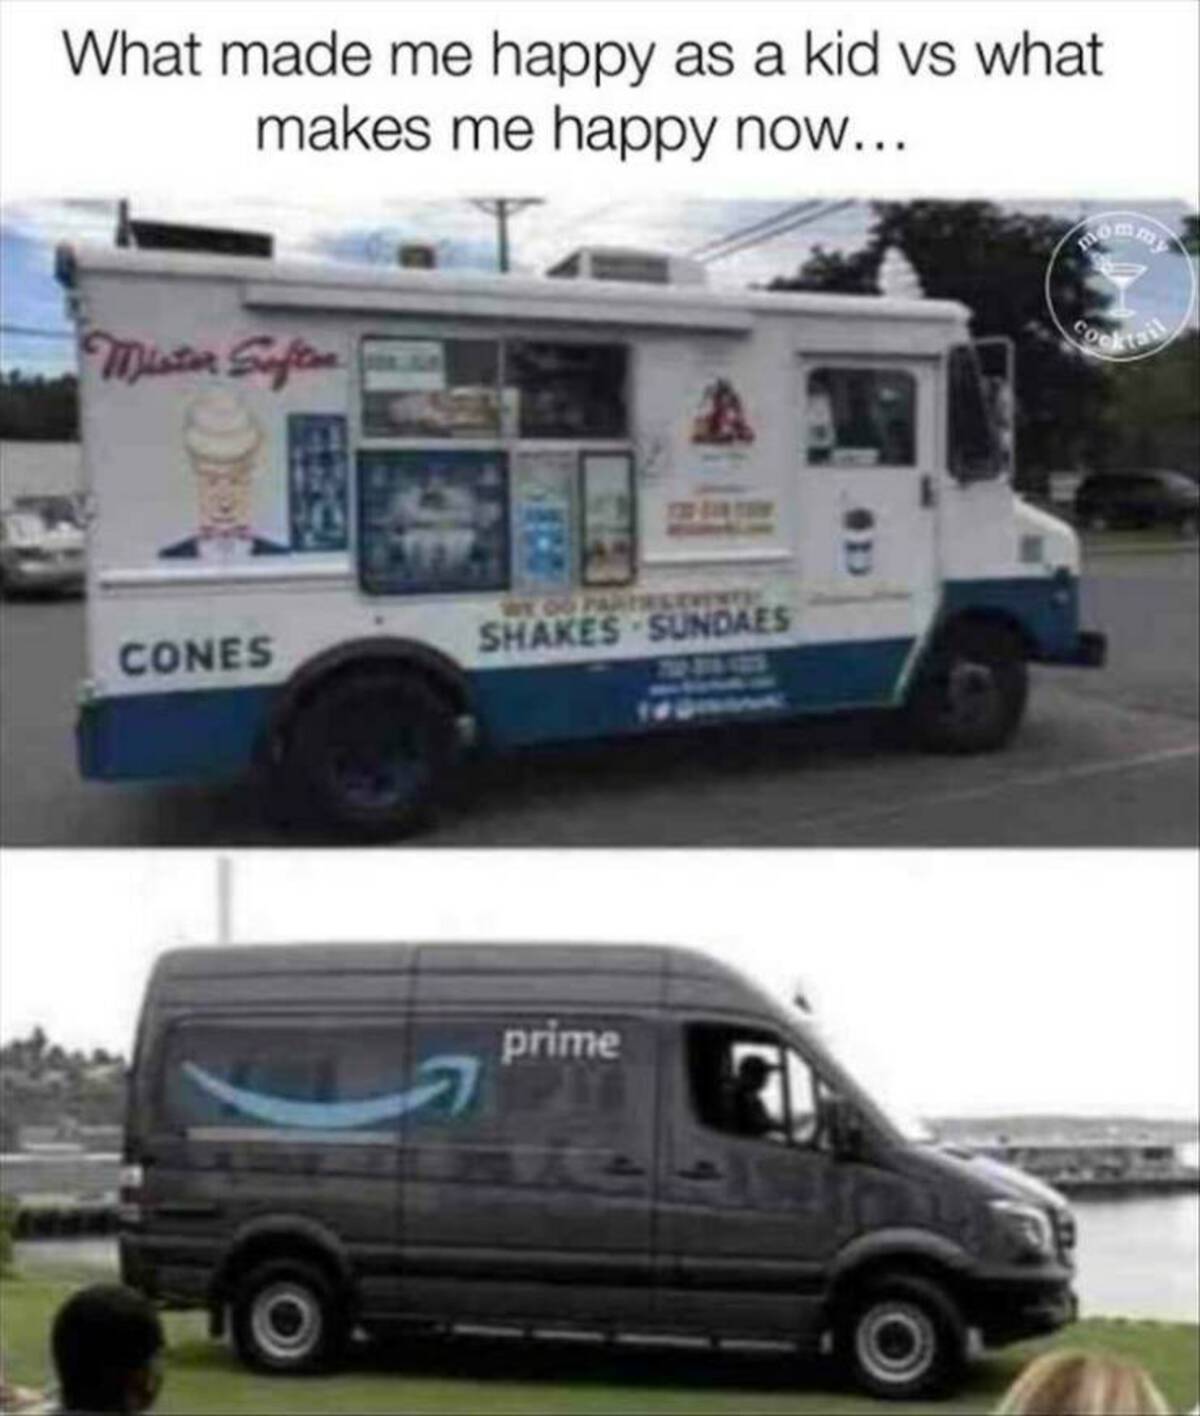 compact van - What made me happy as a kid vs what makes me happy now... Mommy Mister Soften Cocktail A Cones Do Partire Events Shakes Sundaes prime